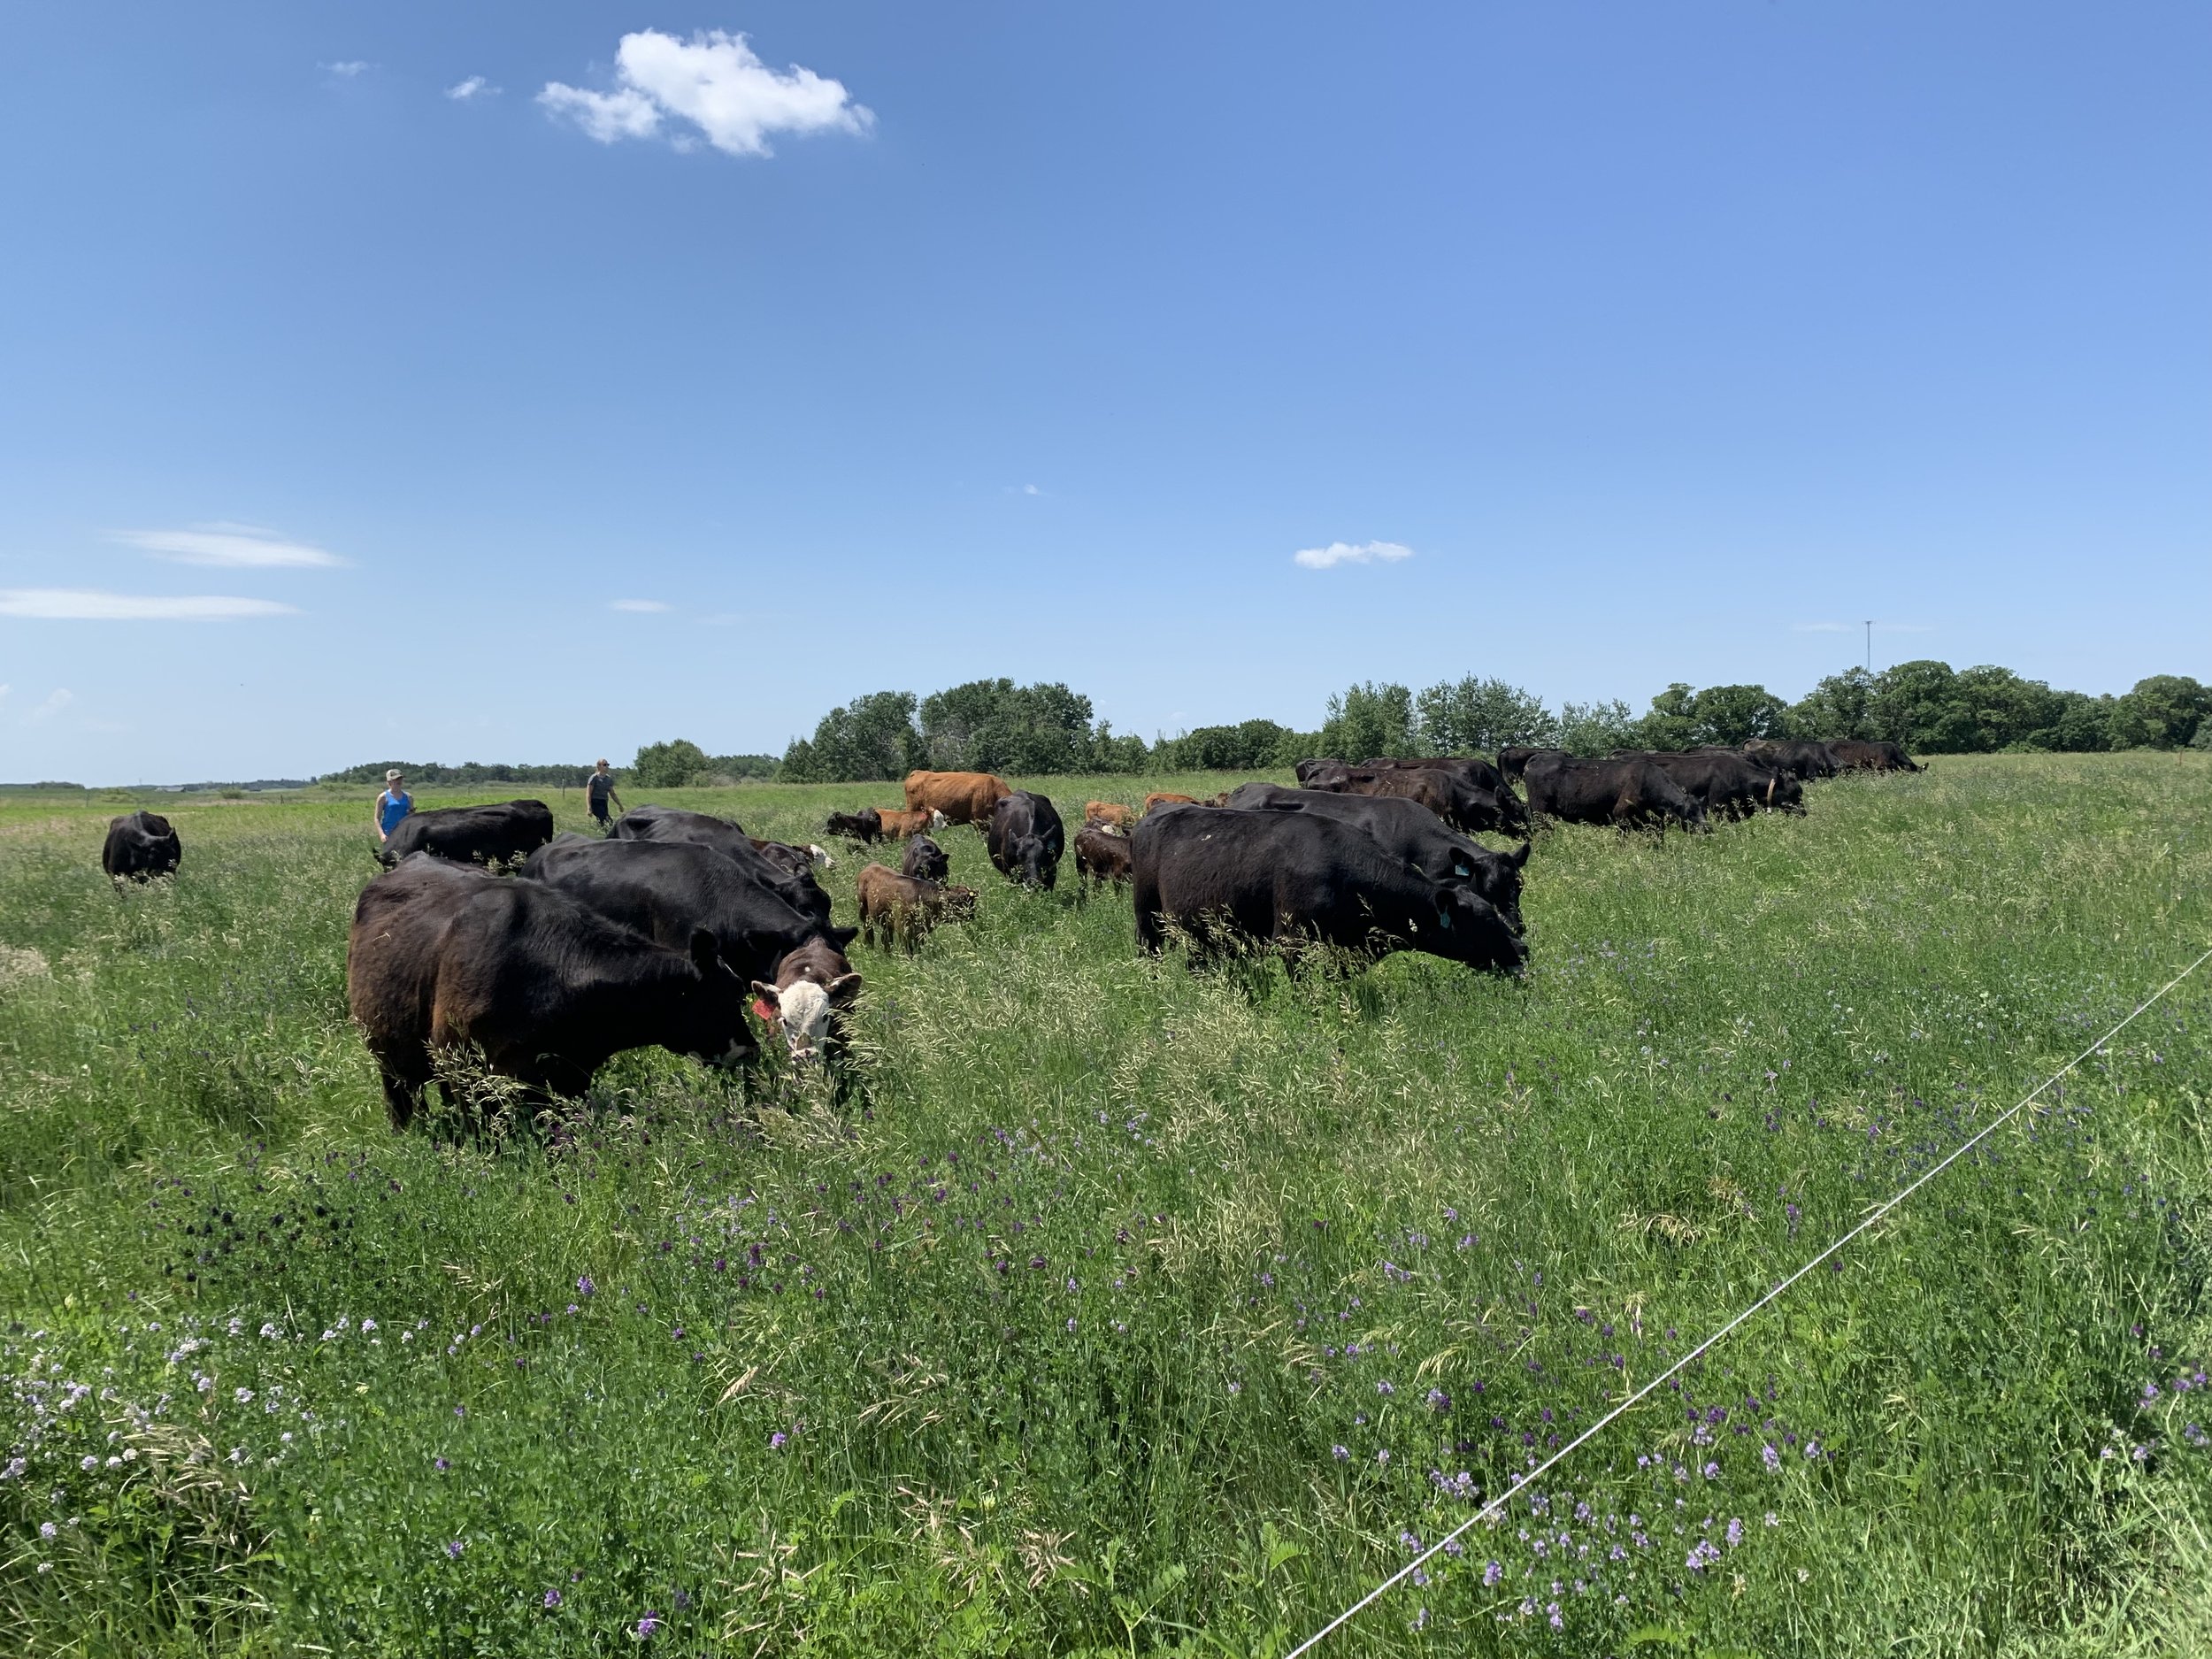  Cows grazing on a planned grazing cell. June 30, 2021. 